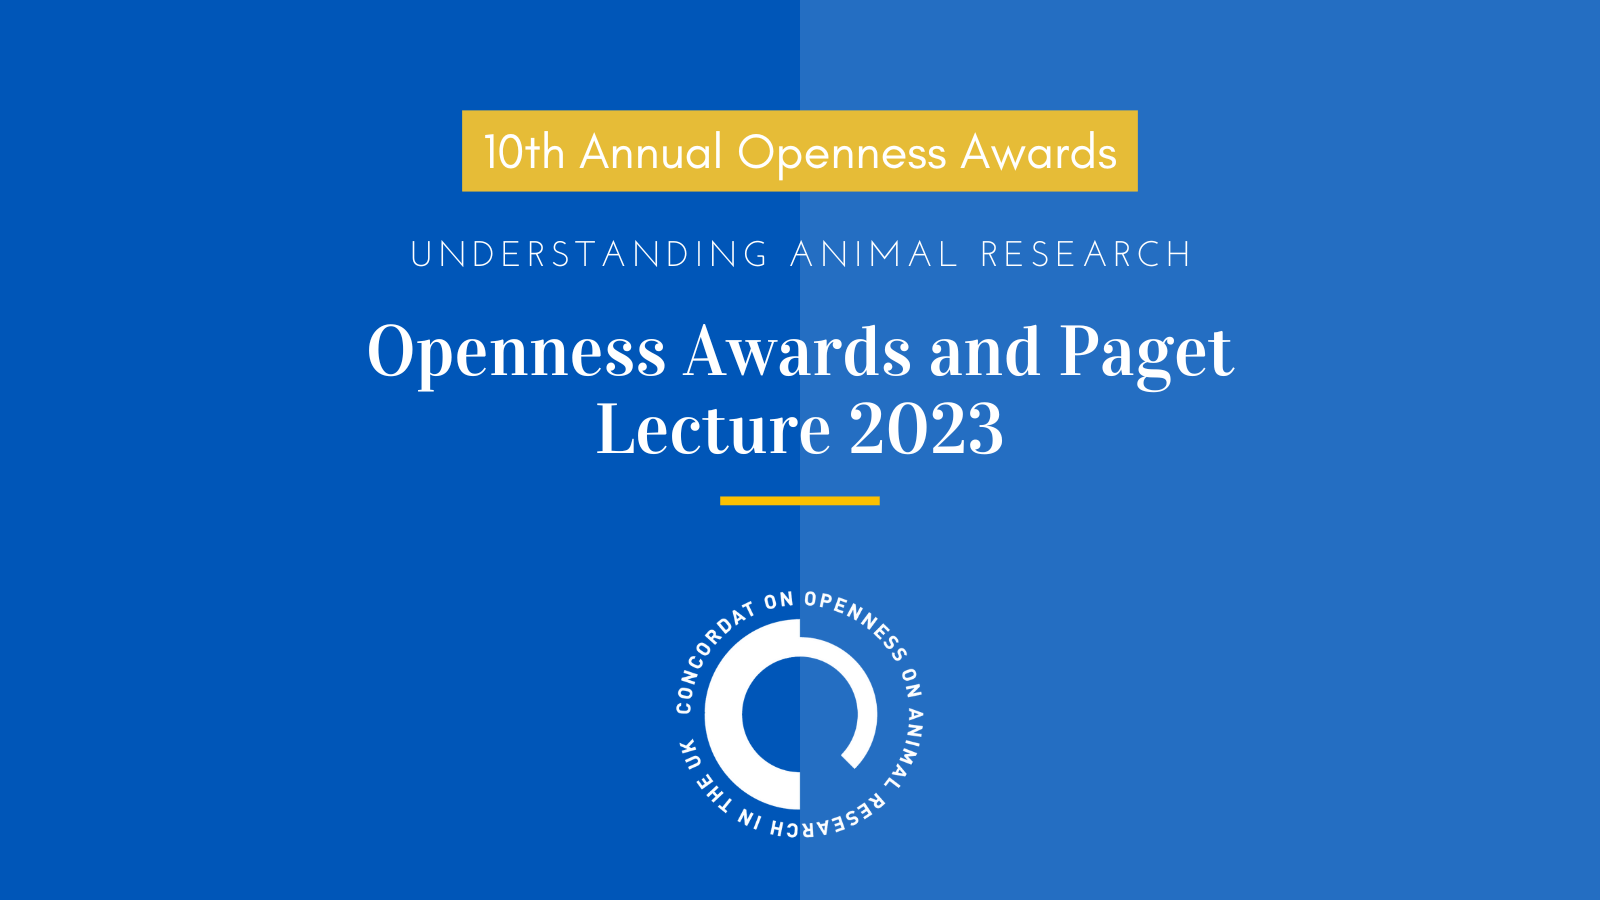 Openness Awards and Paget Lecture 2023